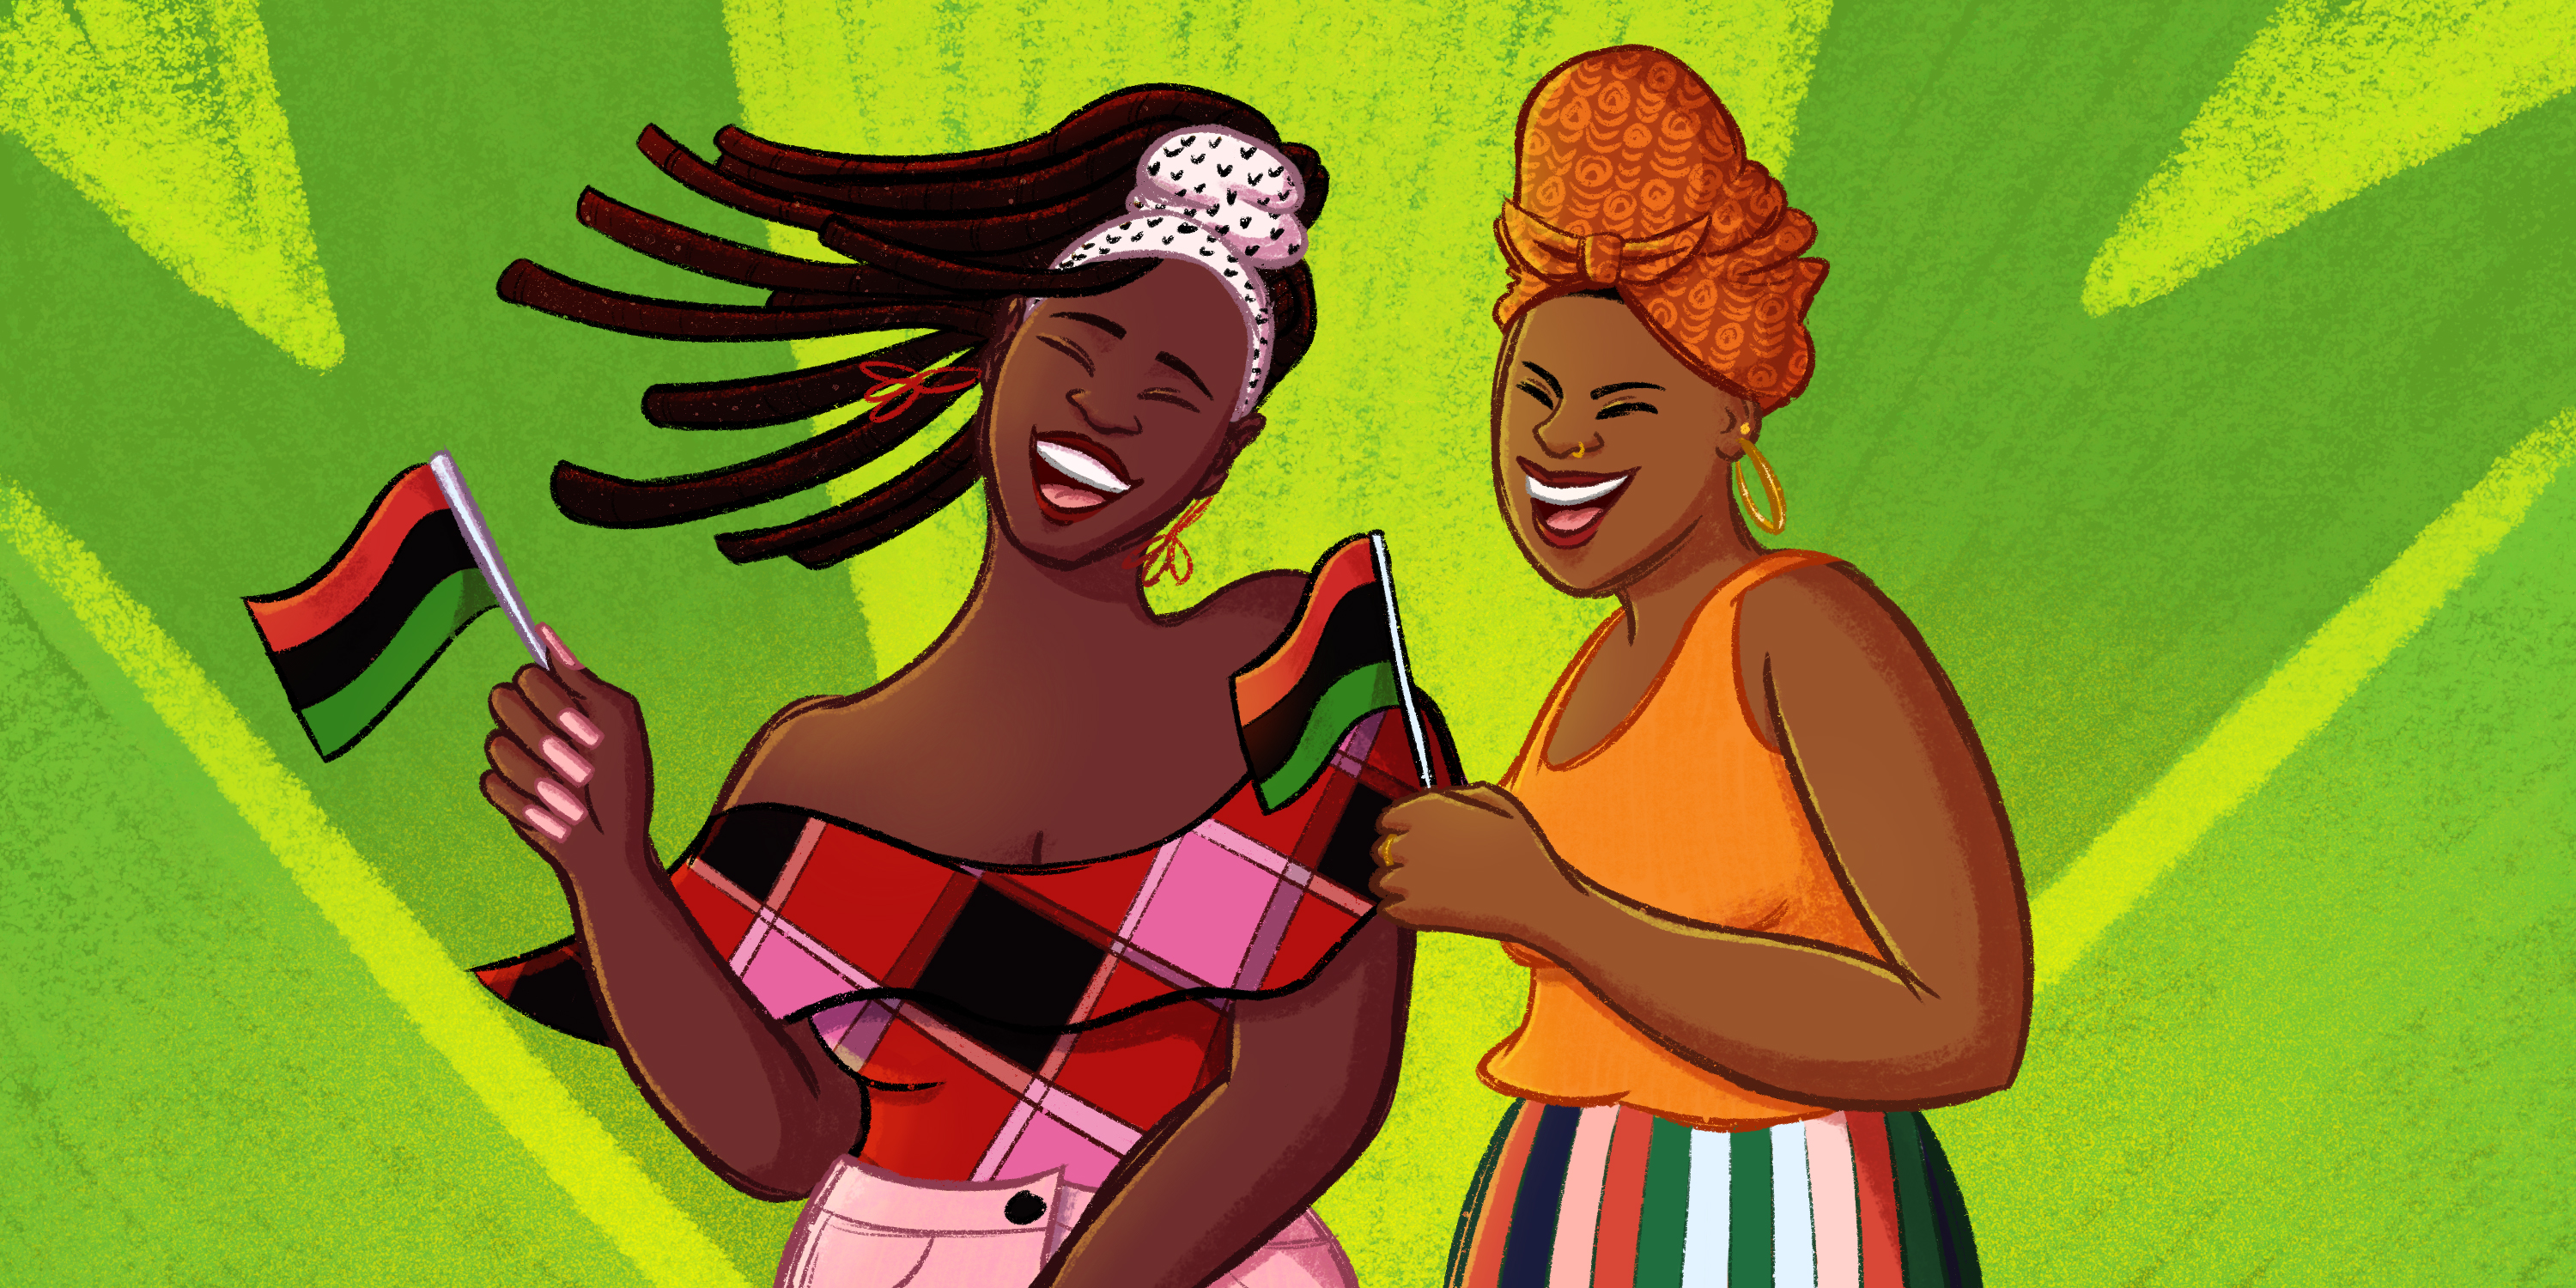 Two Black women laughing waving the pan-African flag. They are wearing head scarfs and colorful clothing. They are in front of a green background.